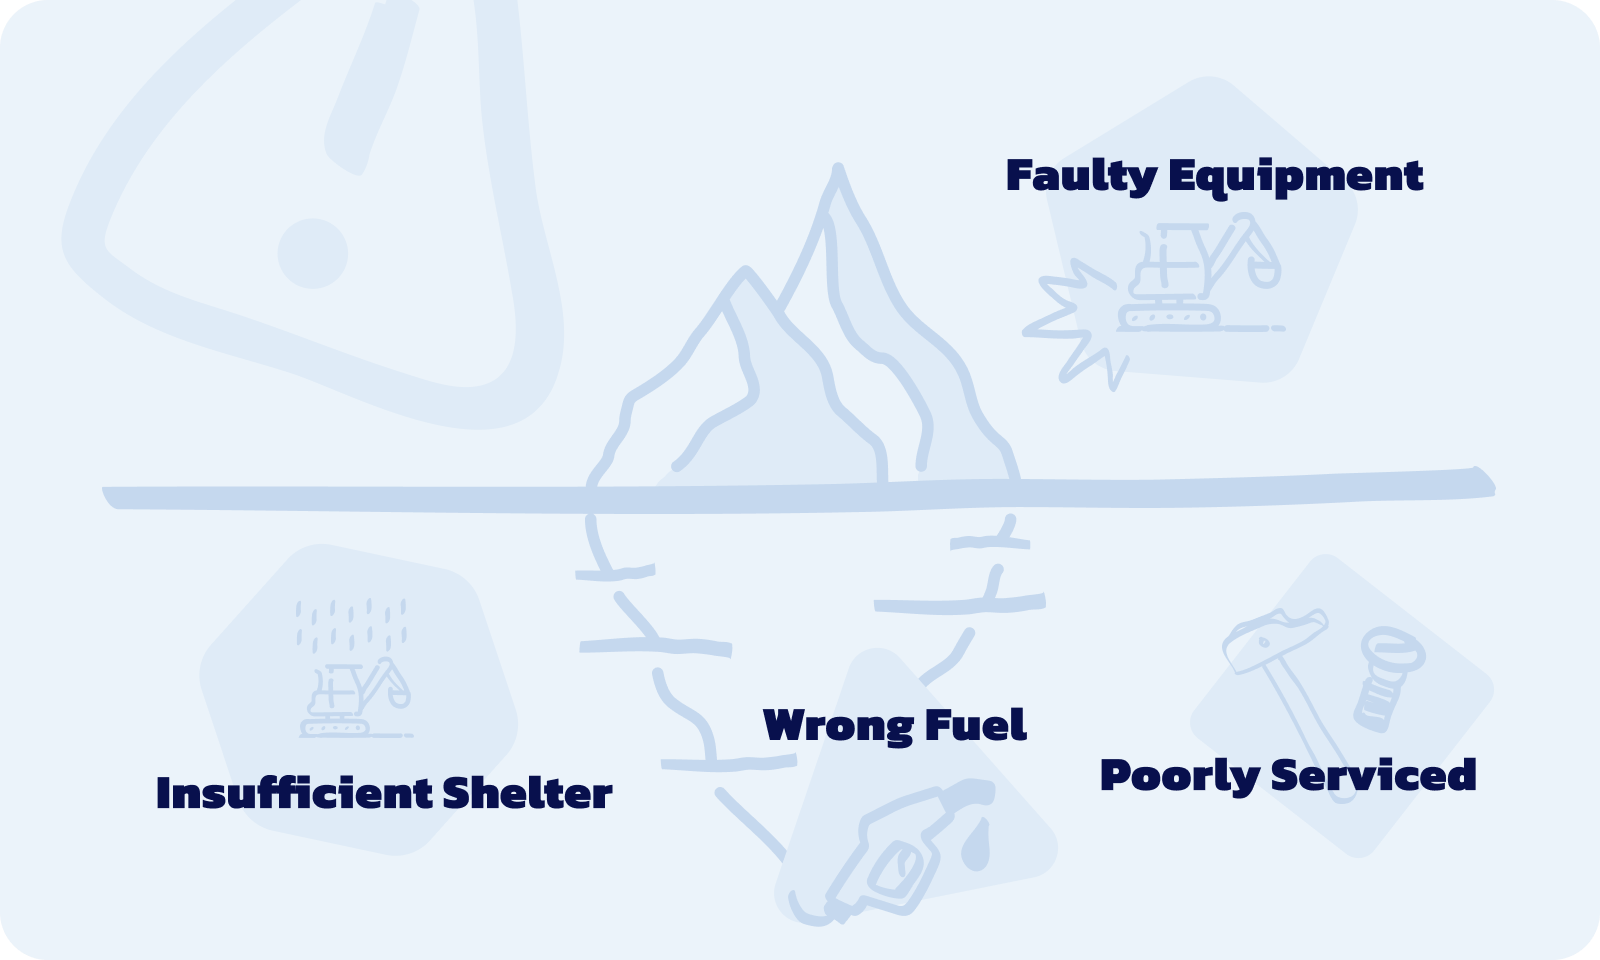 Root cause analysis being shown with a graphic of an iceberg, indicating problems that are above and below the surface.